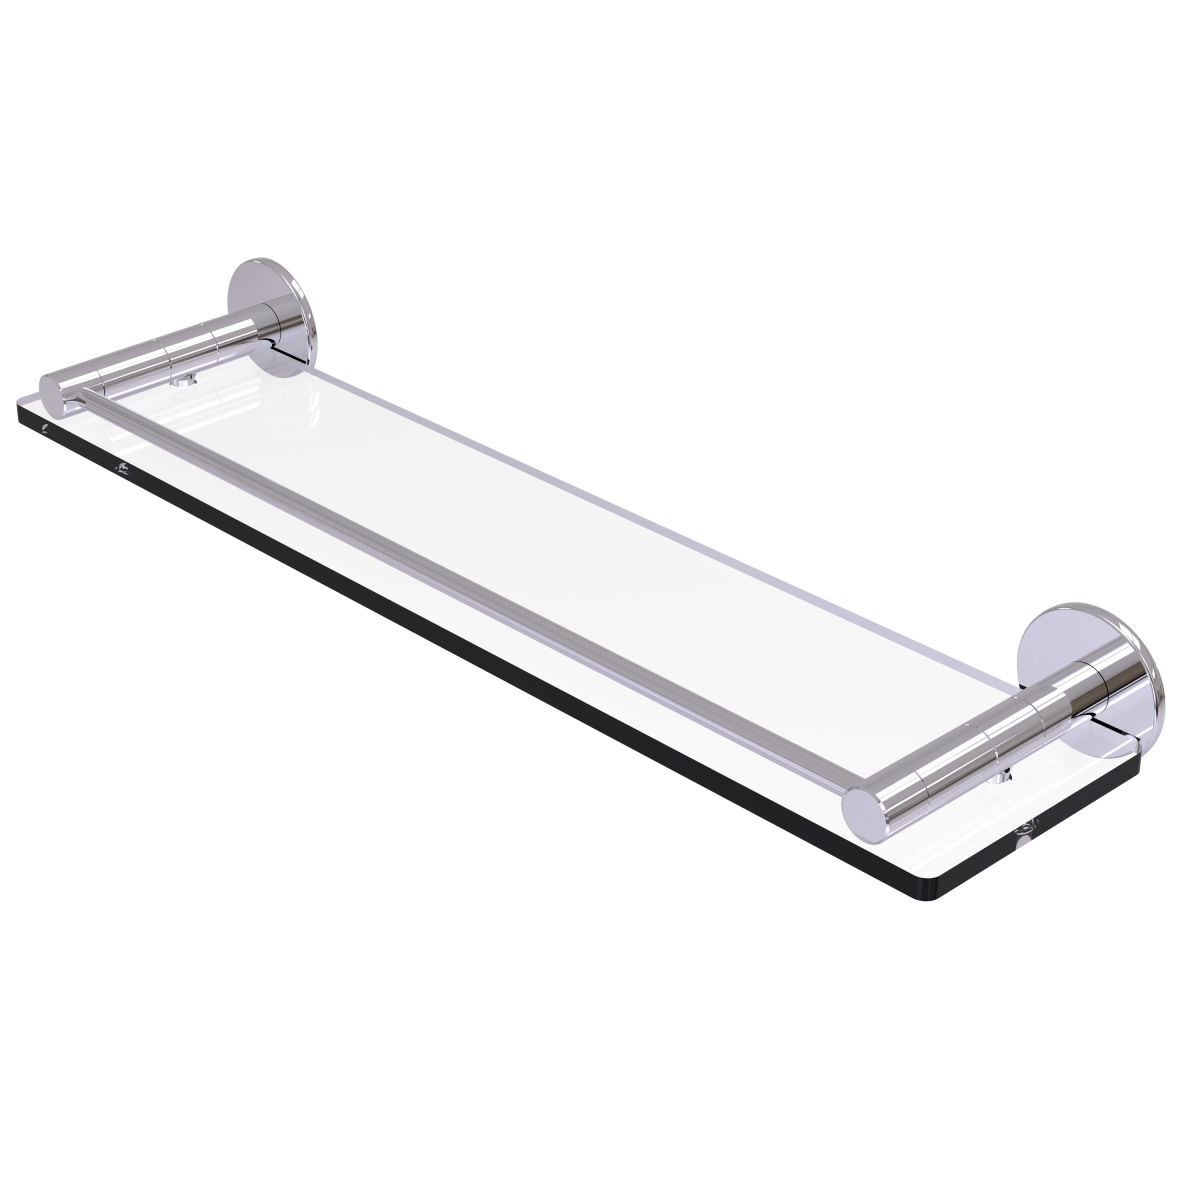 Allied Brass FR-1-22G-PC 22 in. Fresno Collection Glass Shelf with Vanity Rail, Polished Chrome